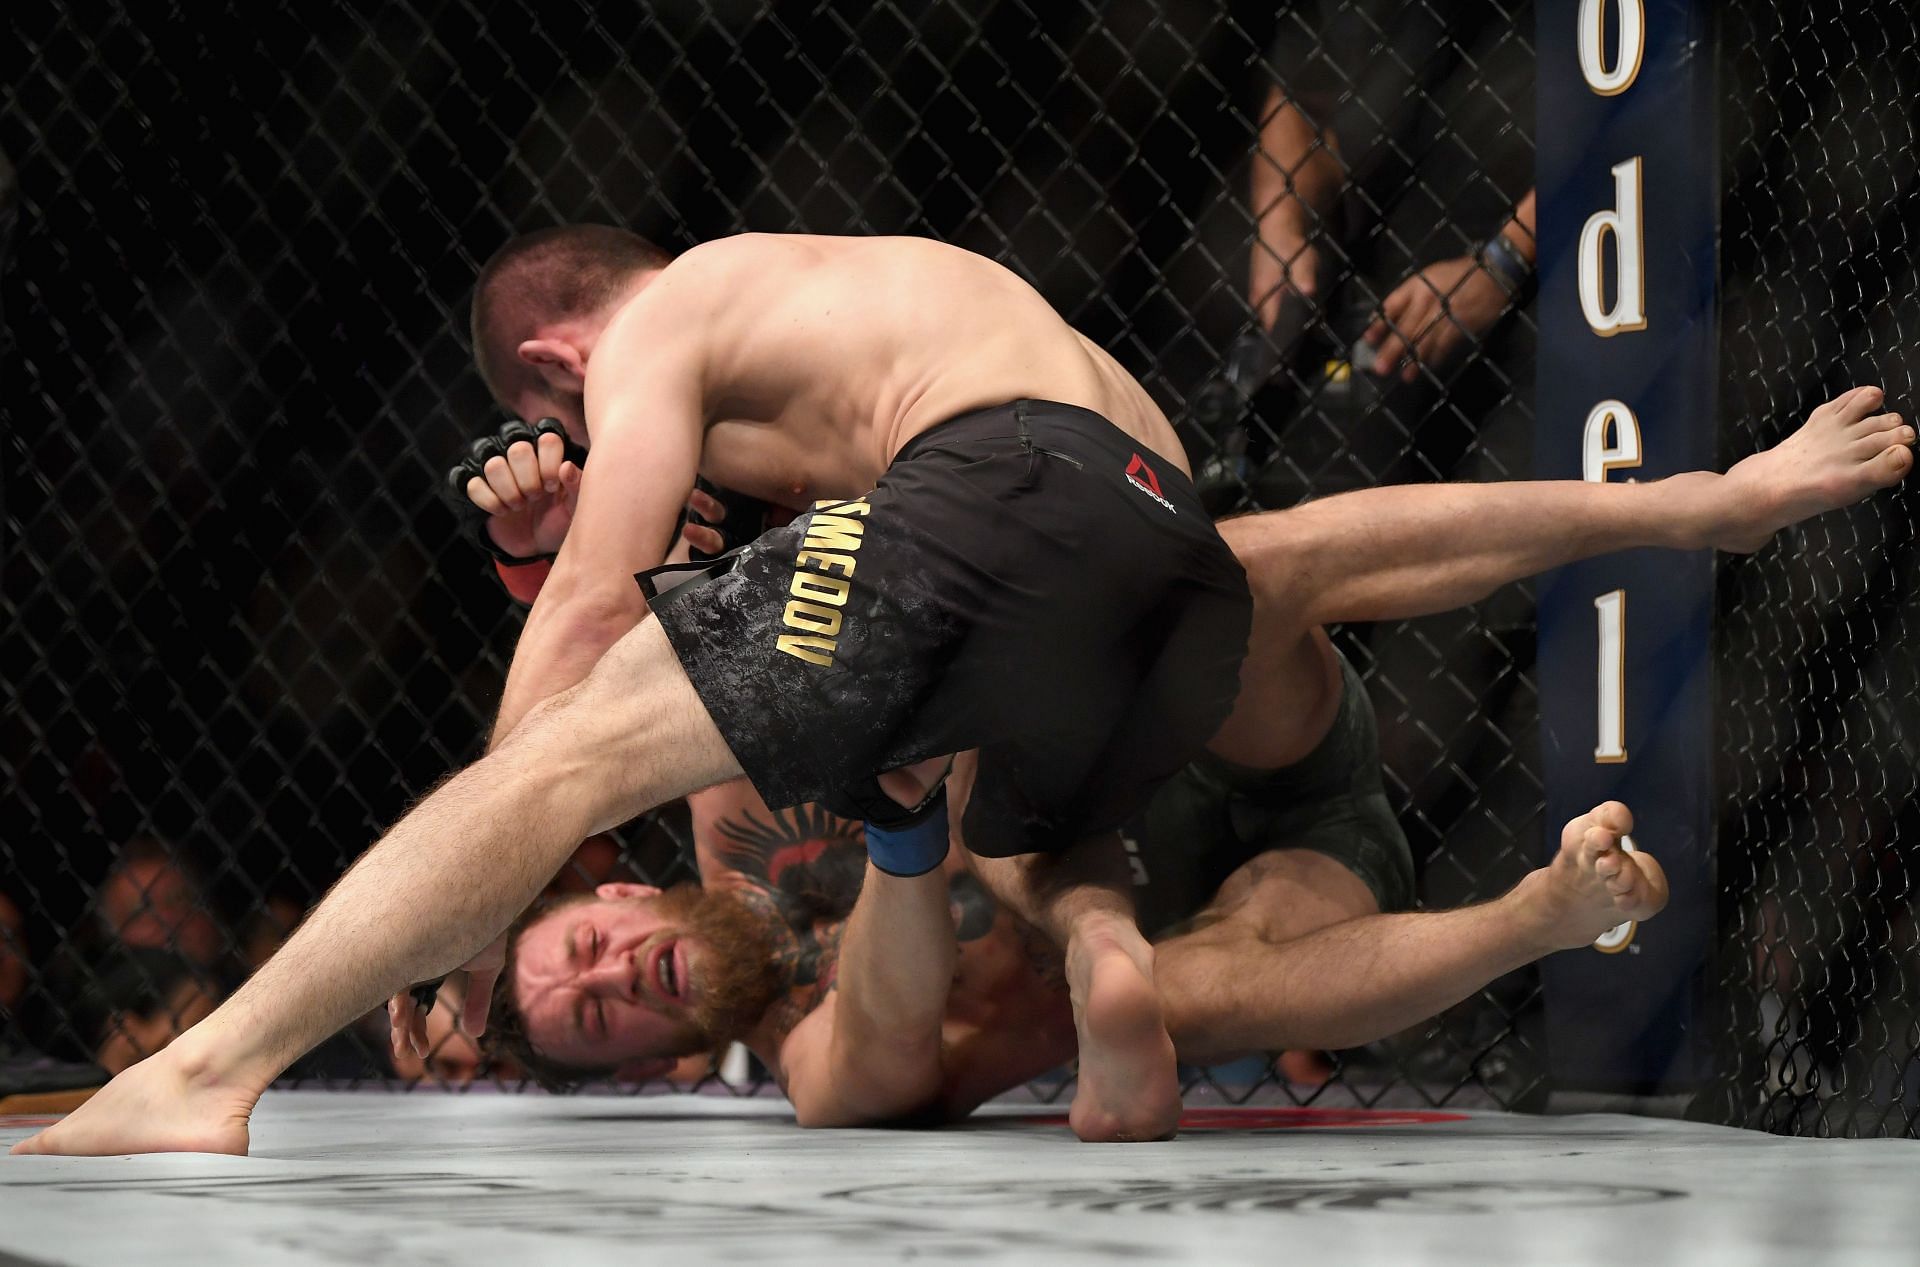 Conor McGregor has struggled with grapplers in the past